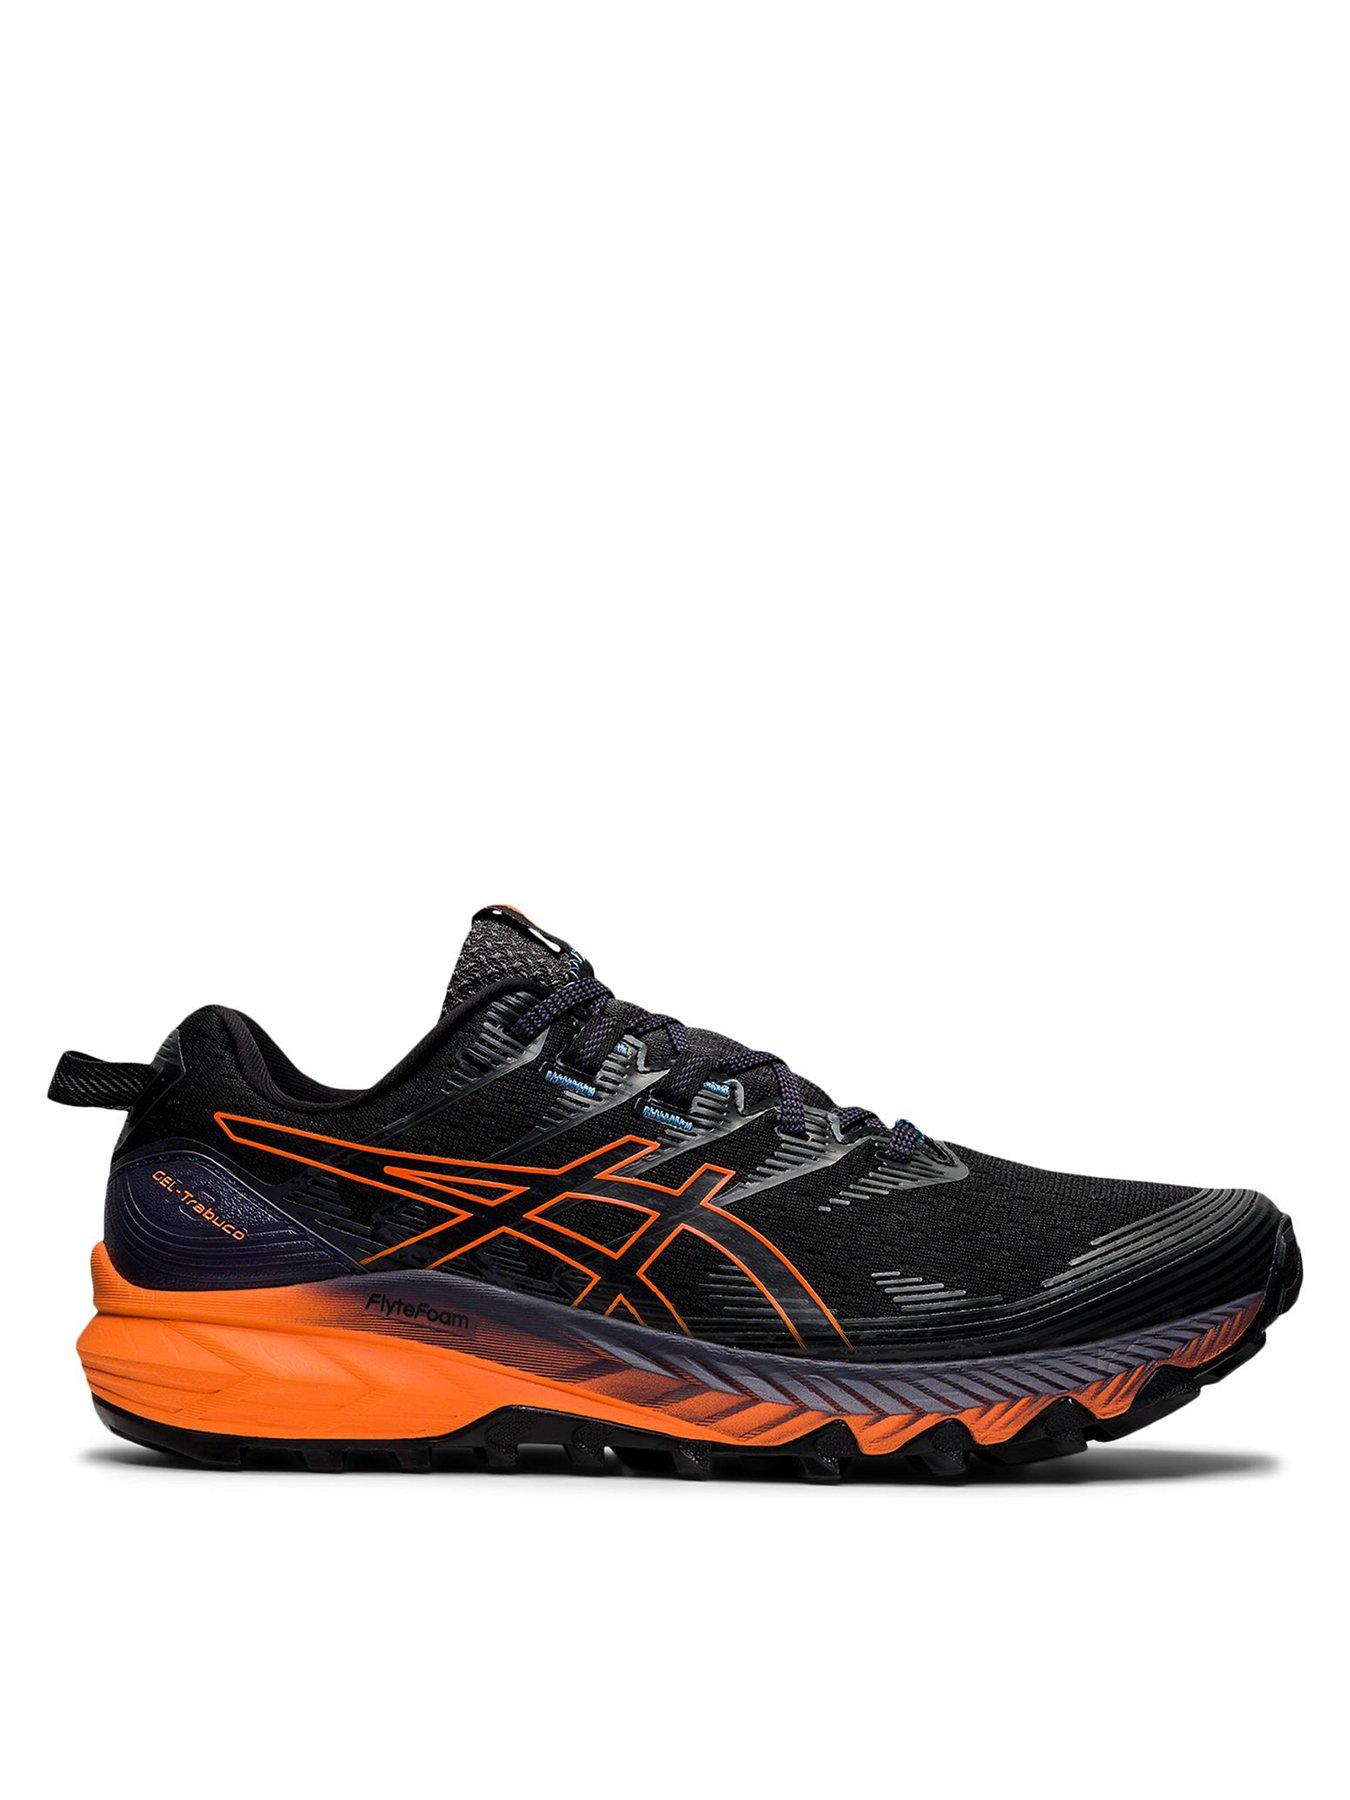 All Black Friday Deals | Asics | Mens trainers | Mens sports shoes | & leisure www.very.co.uk